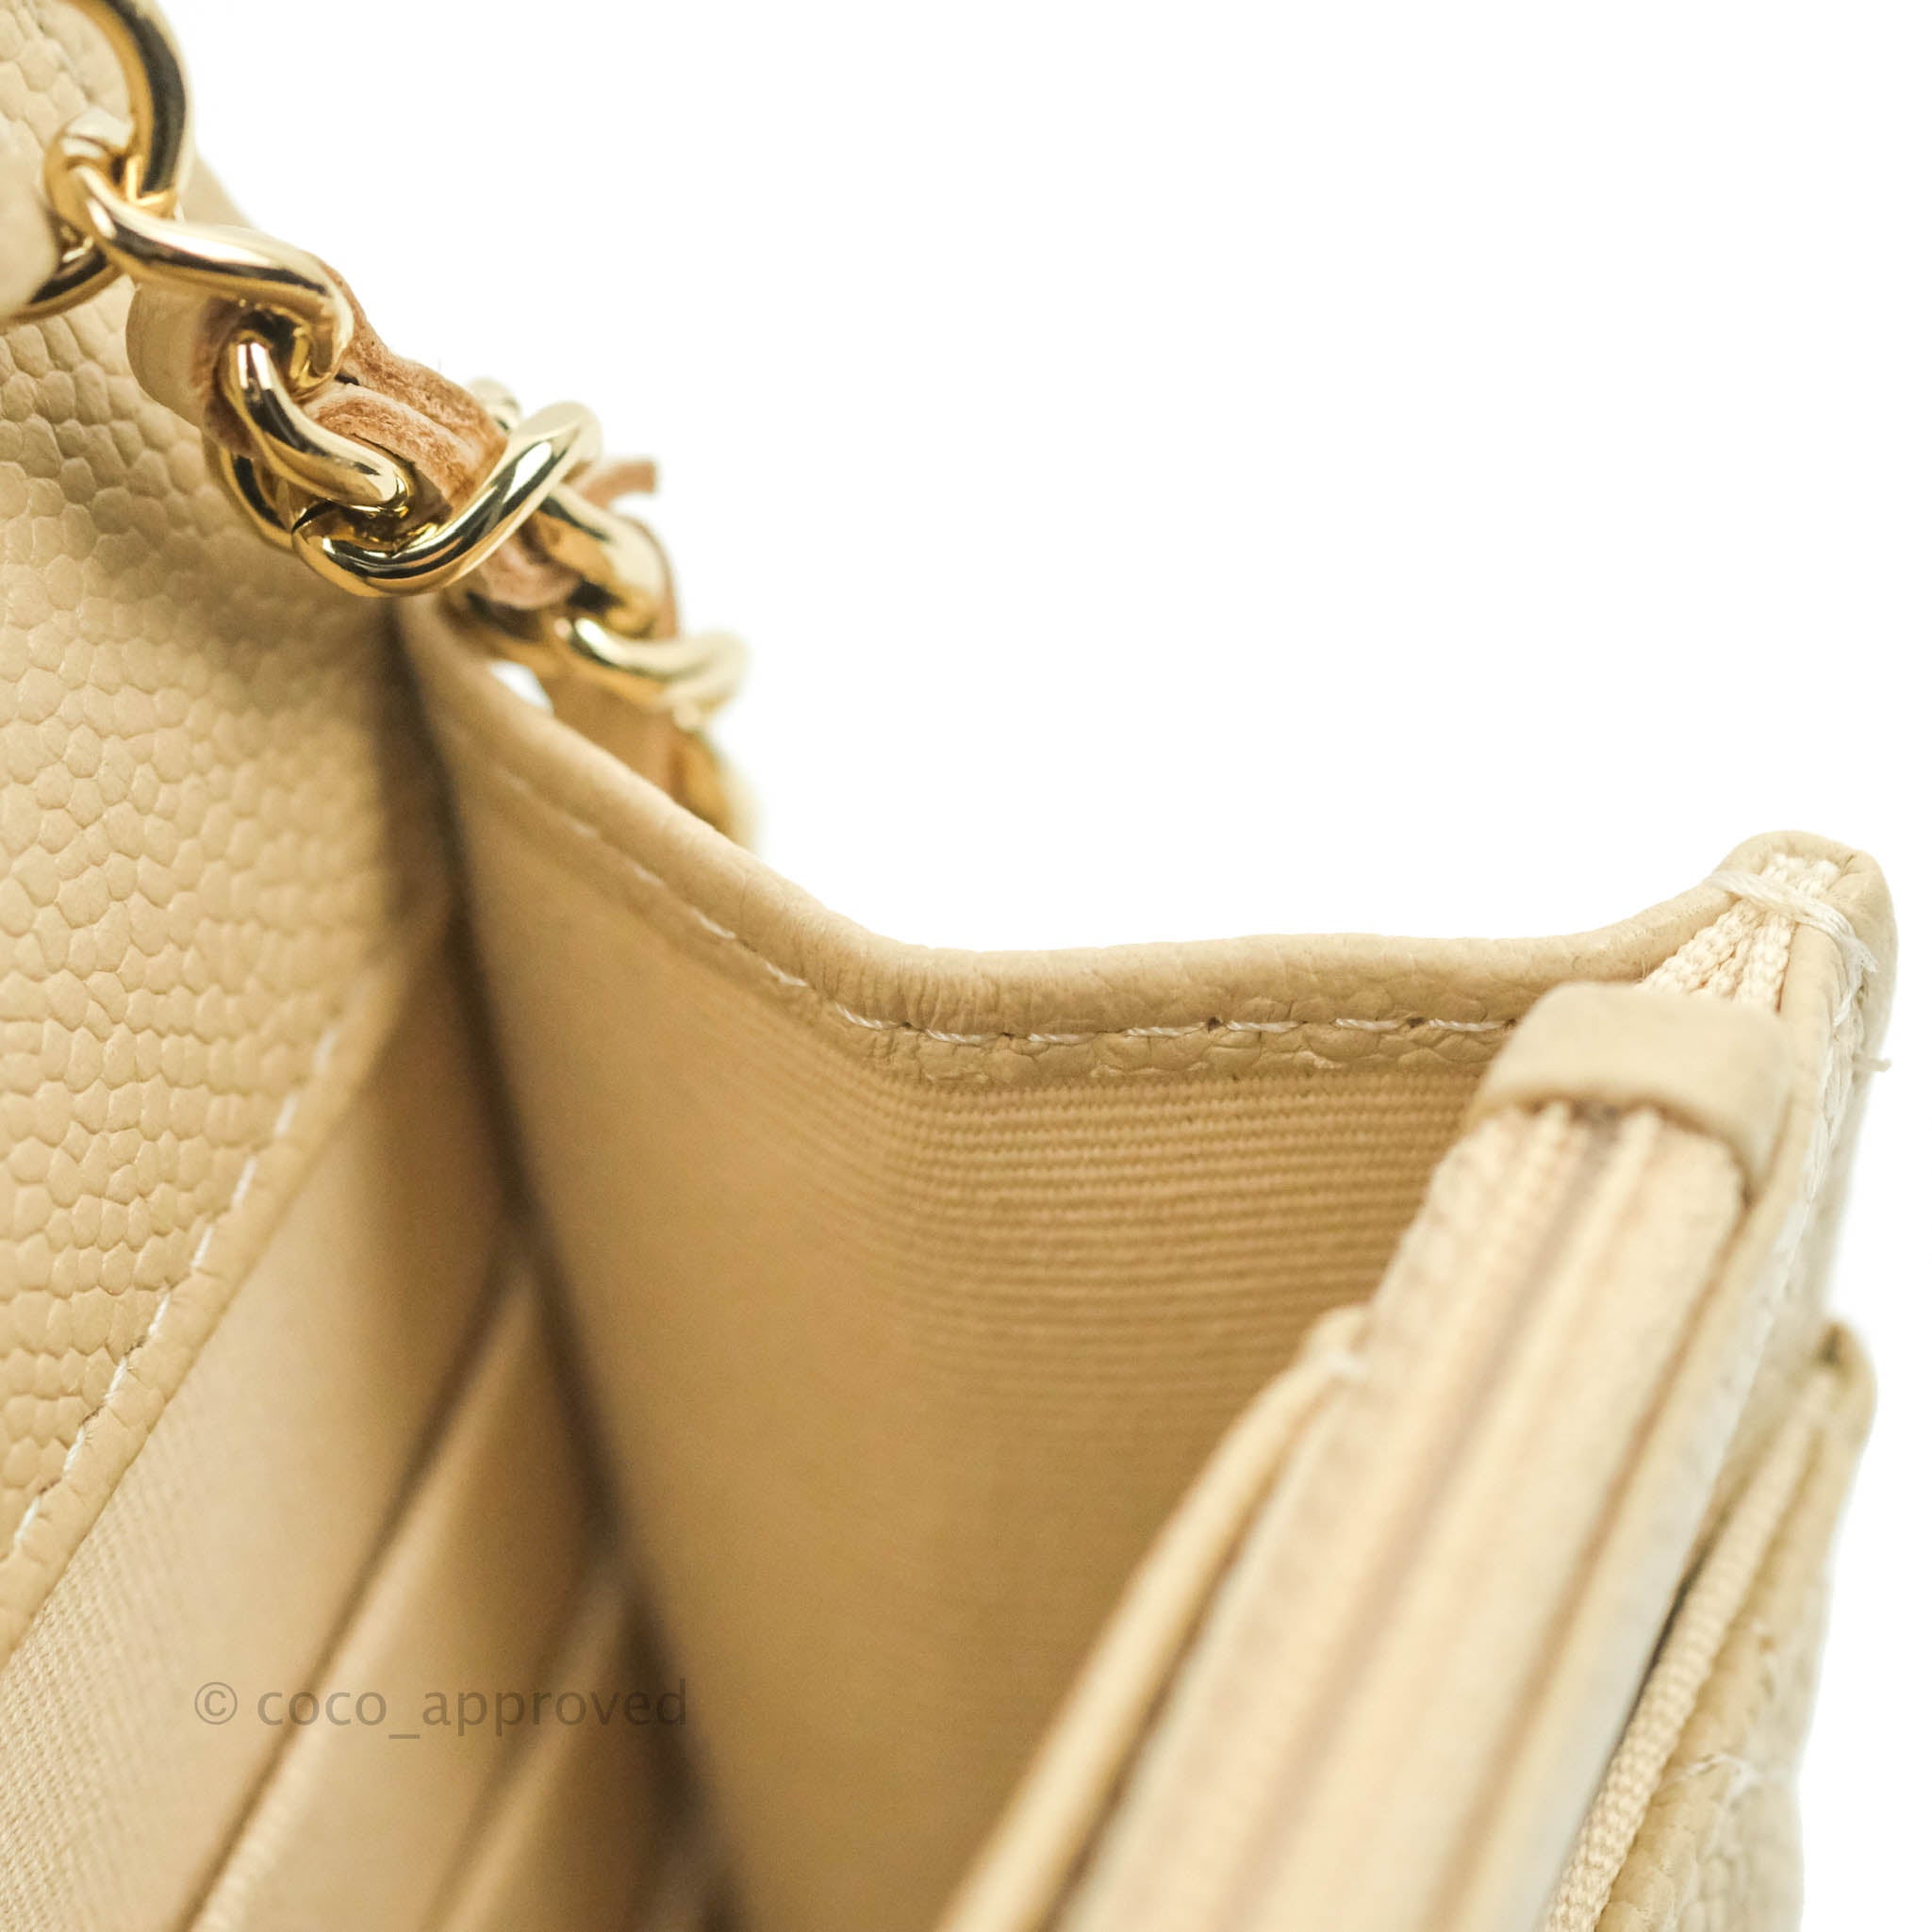 Chanel Quilted Wallet on Chain WOC Beige Caviar Gold Hardware